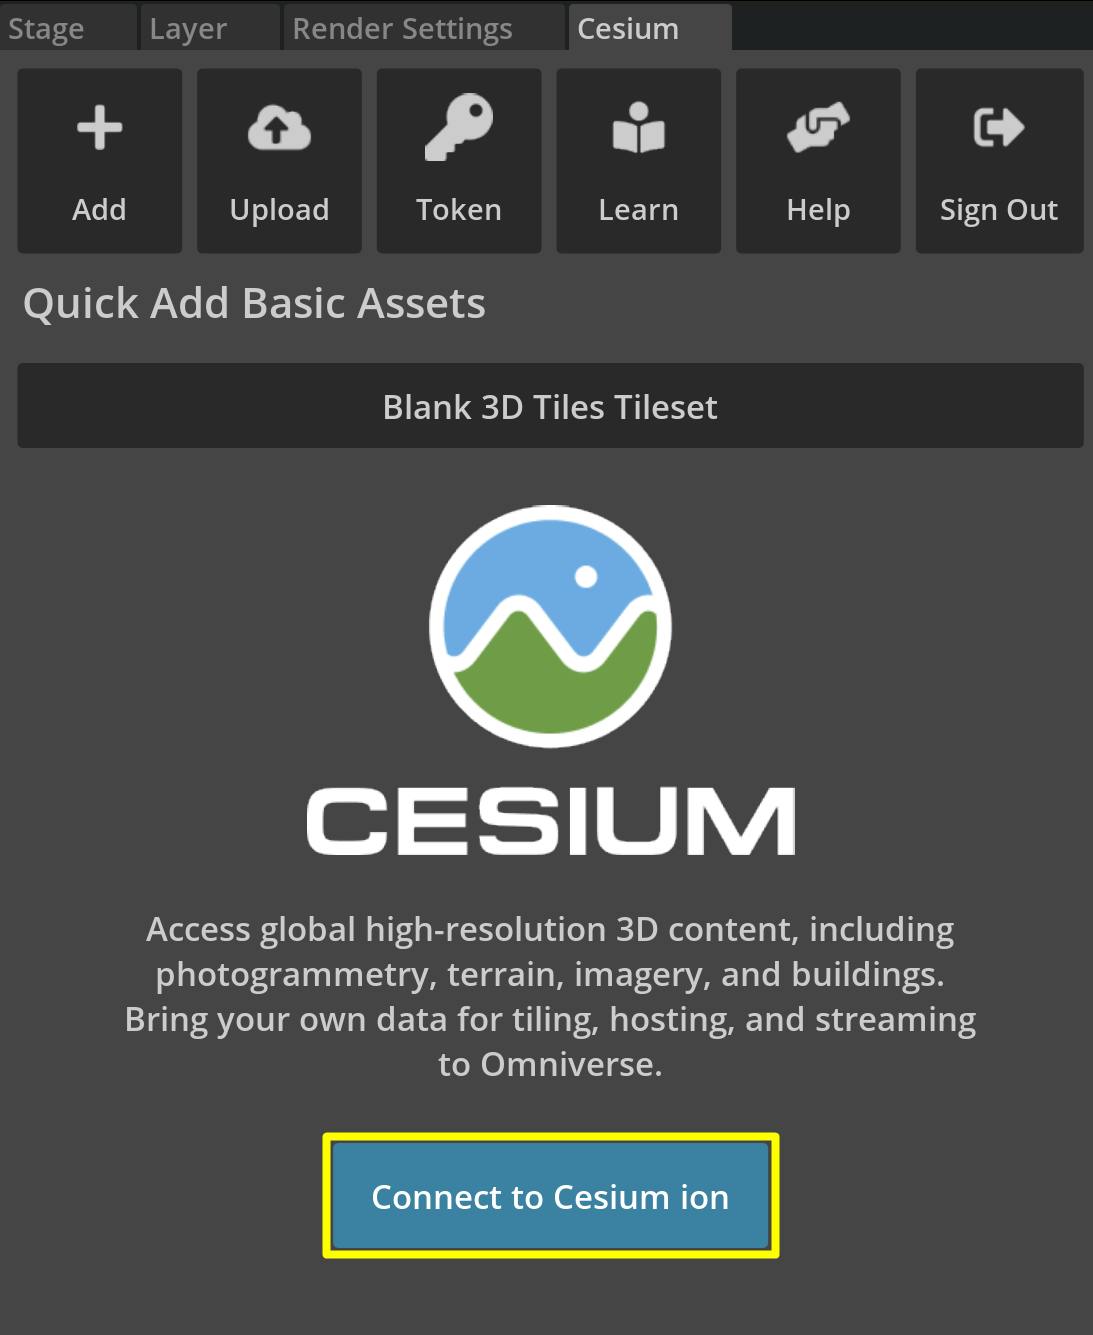 Click the Connect to Cesium ion button.